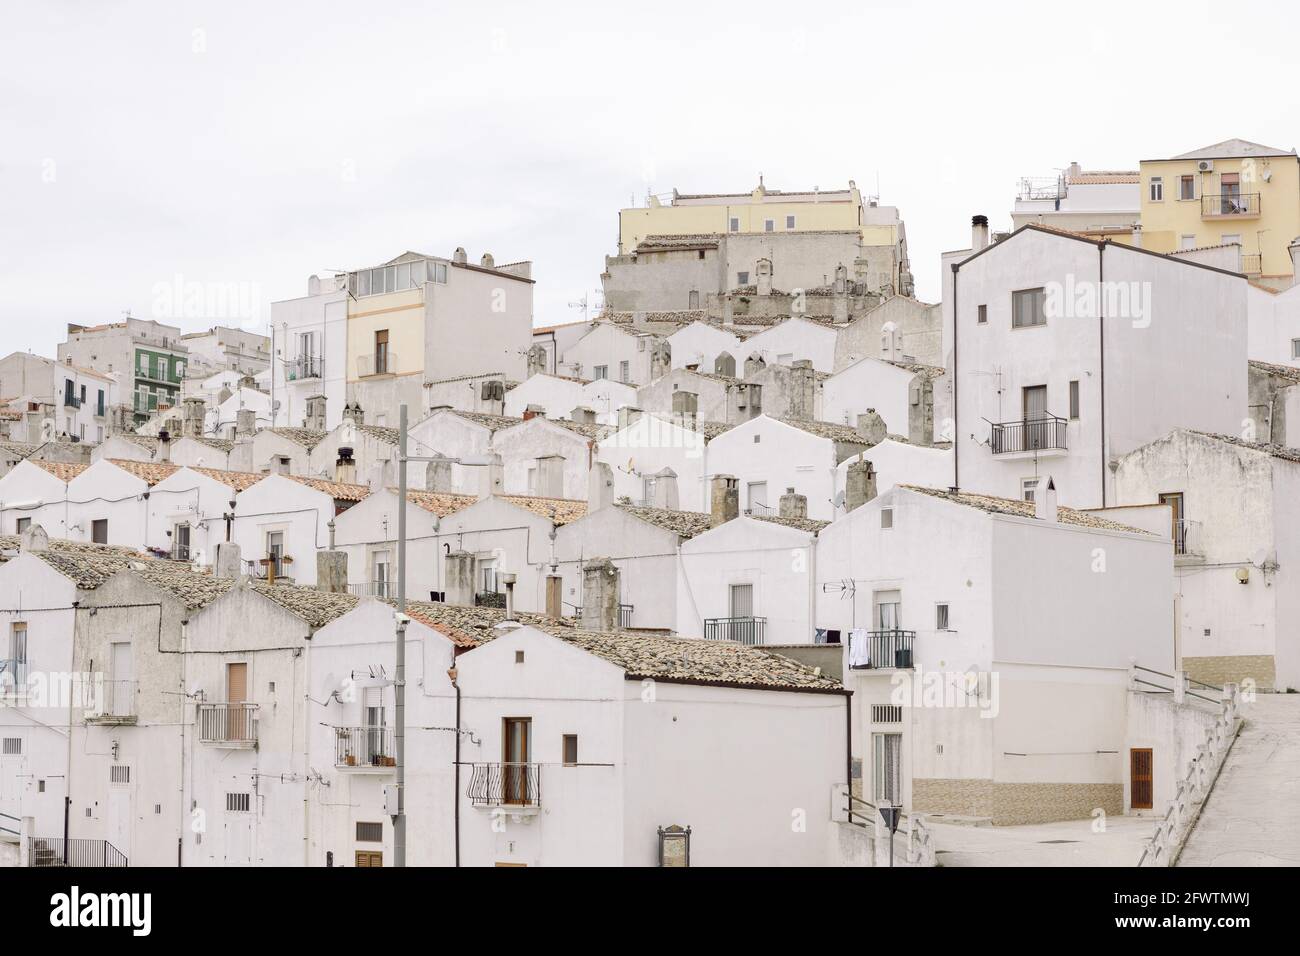 Monte Sant'Angelo white city neighborhood of public housing in the south of Italy, Apulia Stock Photo